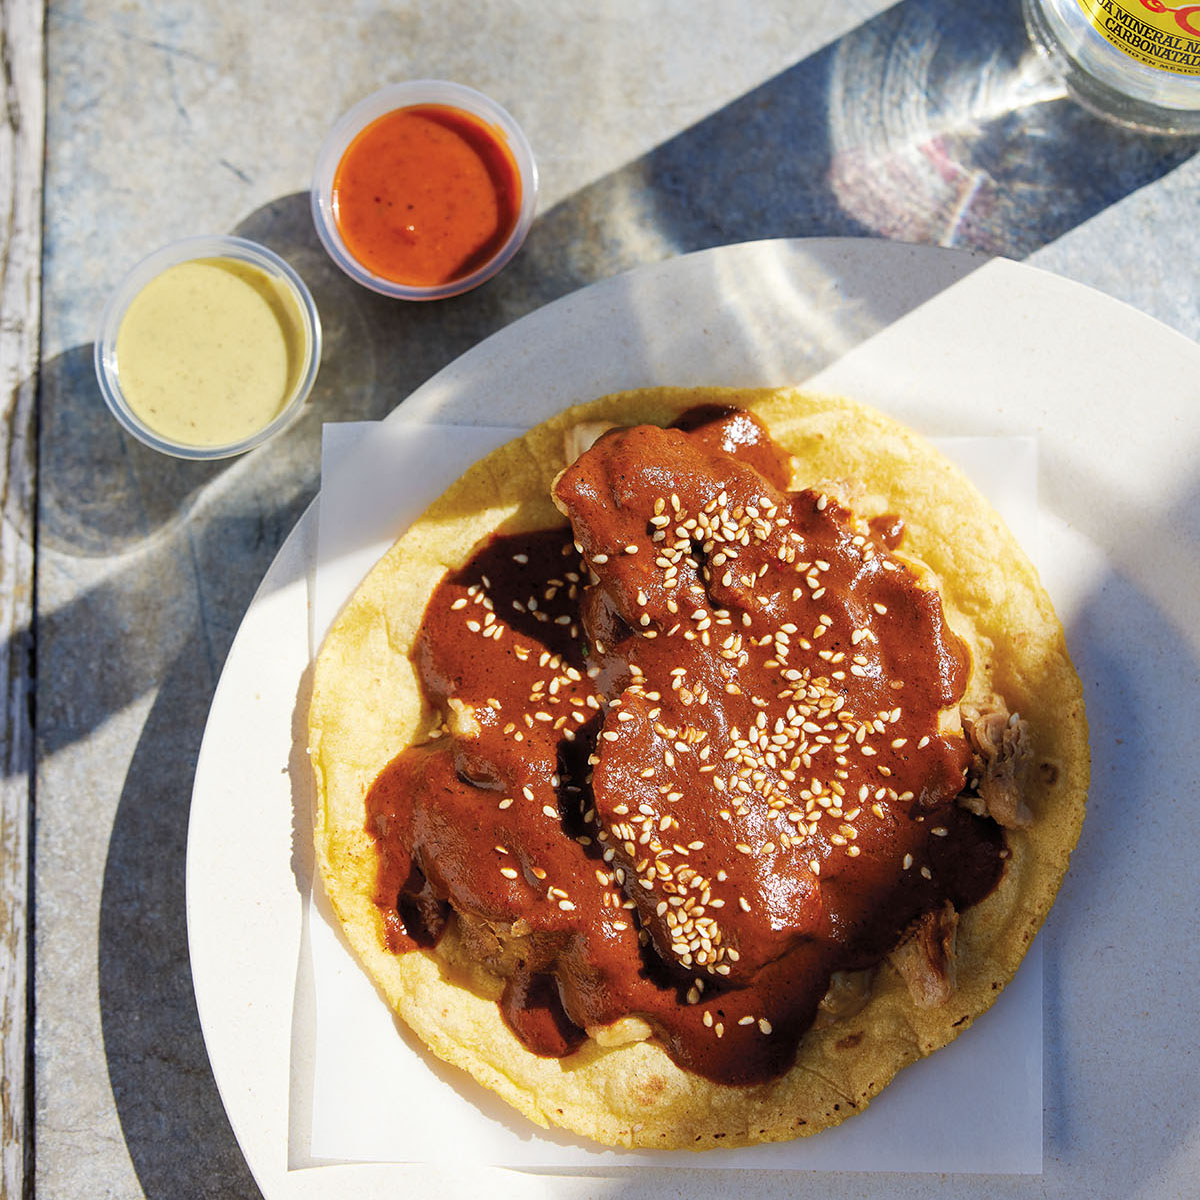 An overhead view of a Mexican dish with a corn tortilla, brown sauce, and two salsas alongside